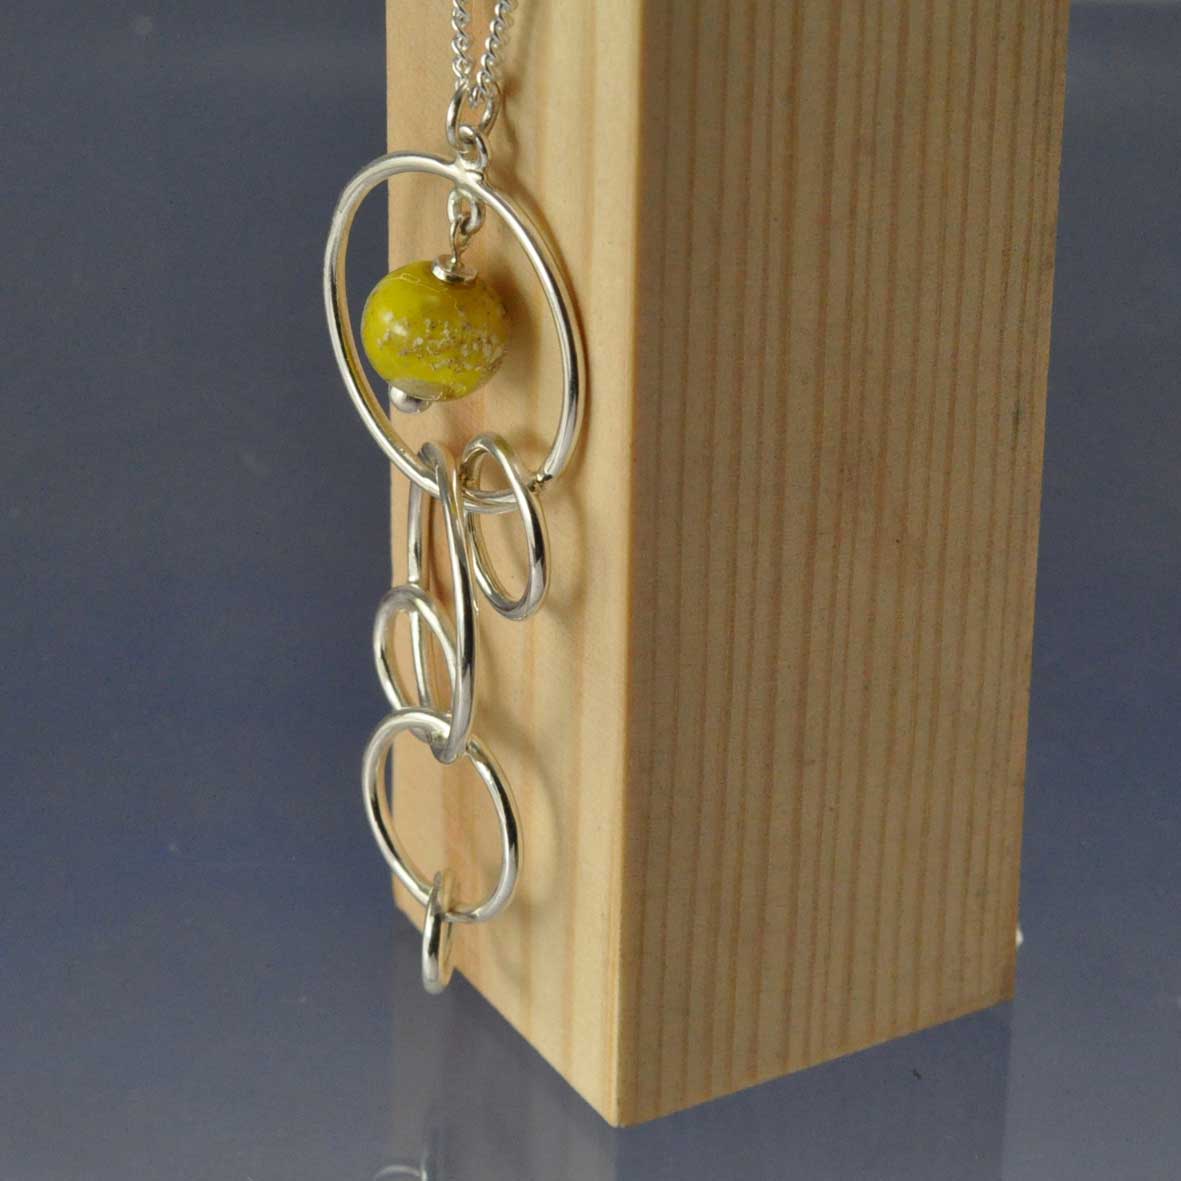 Cremation Ashes Into Glass Bead - Circle Necklace Bead by Chris Parry Jewellery